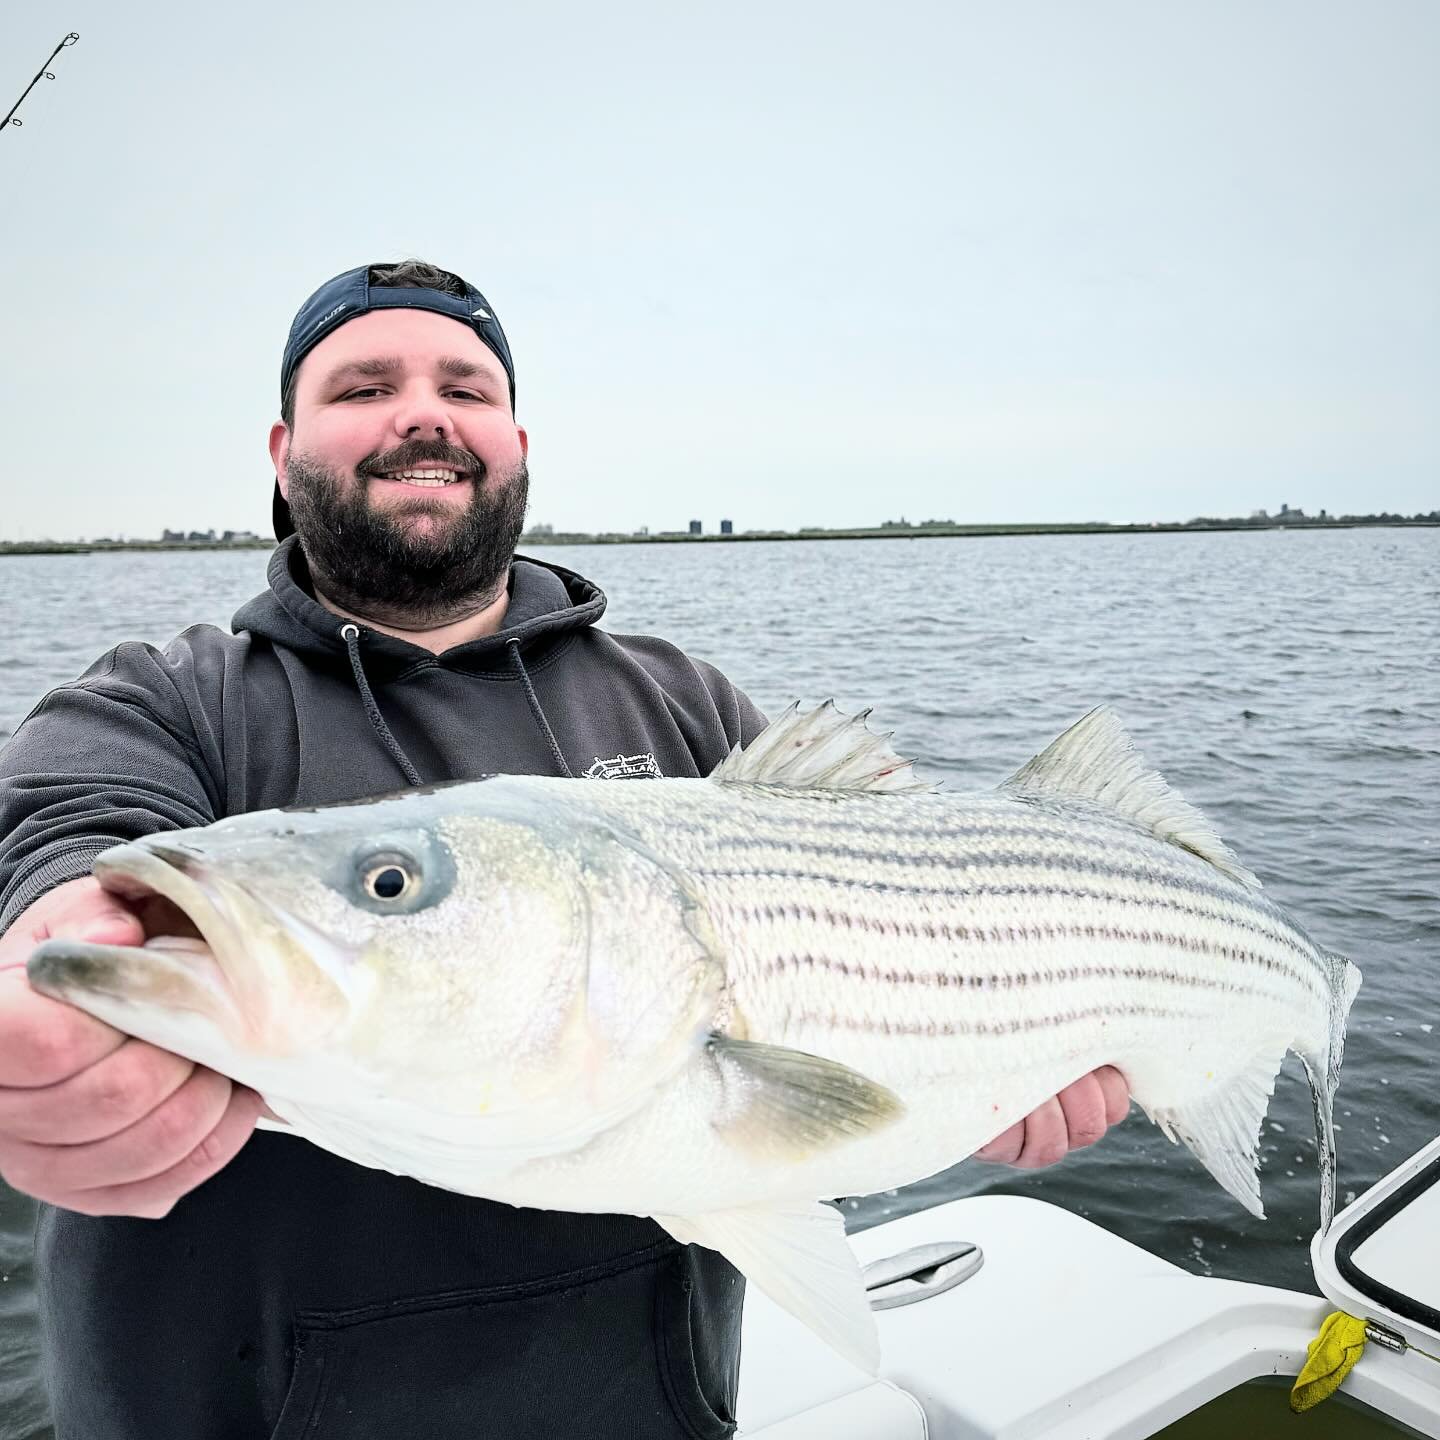 4/21/24: We had a fun open boat trip today with a steady pick of fish throughout the trip. Mostly slot fish with the occasional over, all on live bunker. 
We have some availability for charters next week and still have room on our wed open boats 
See